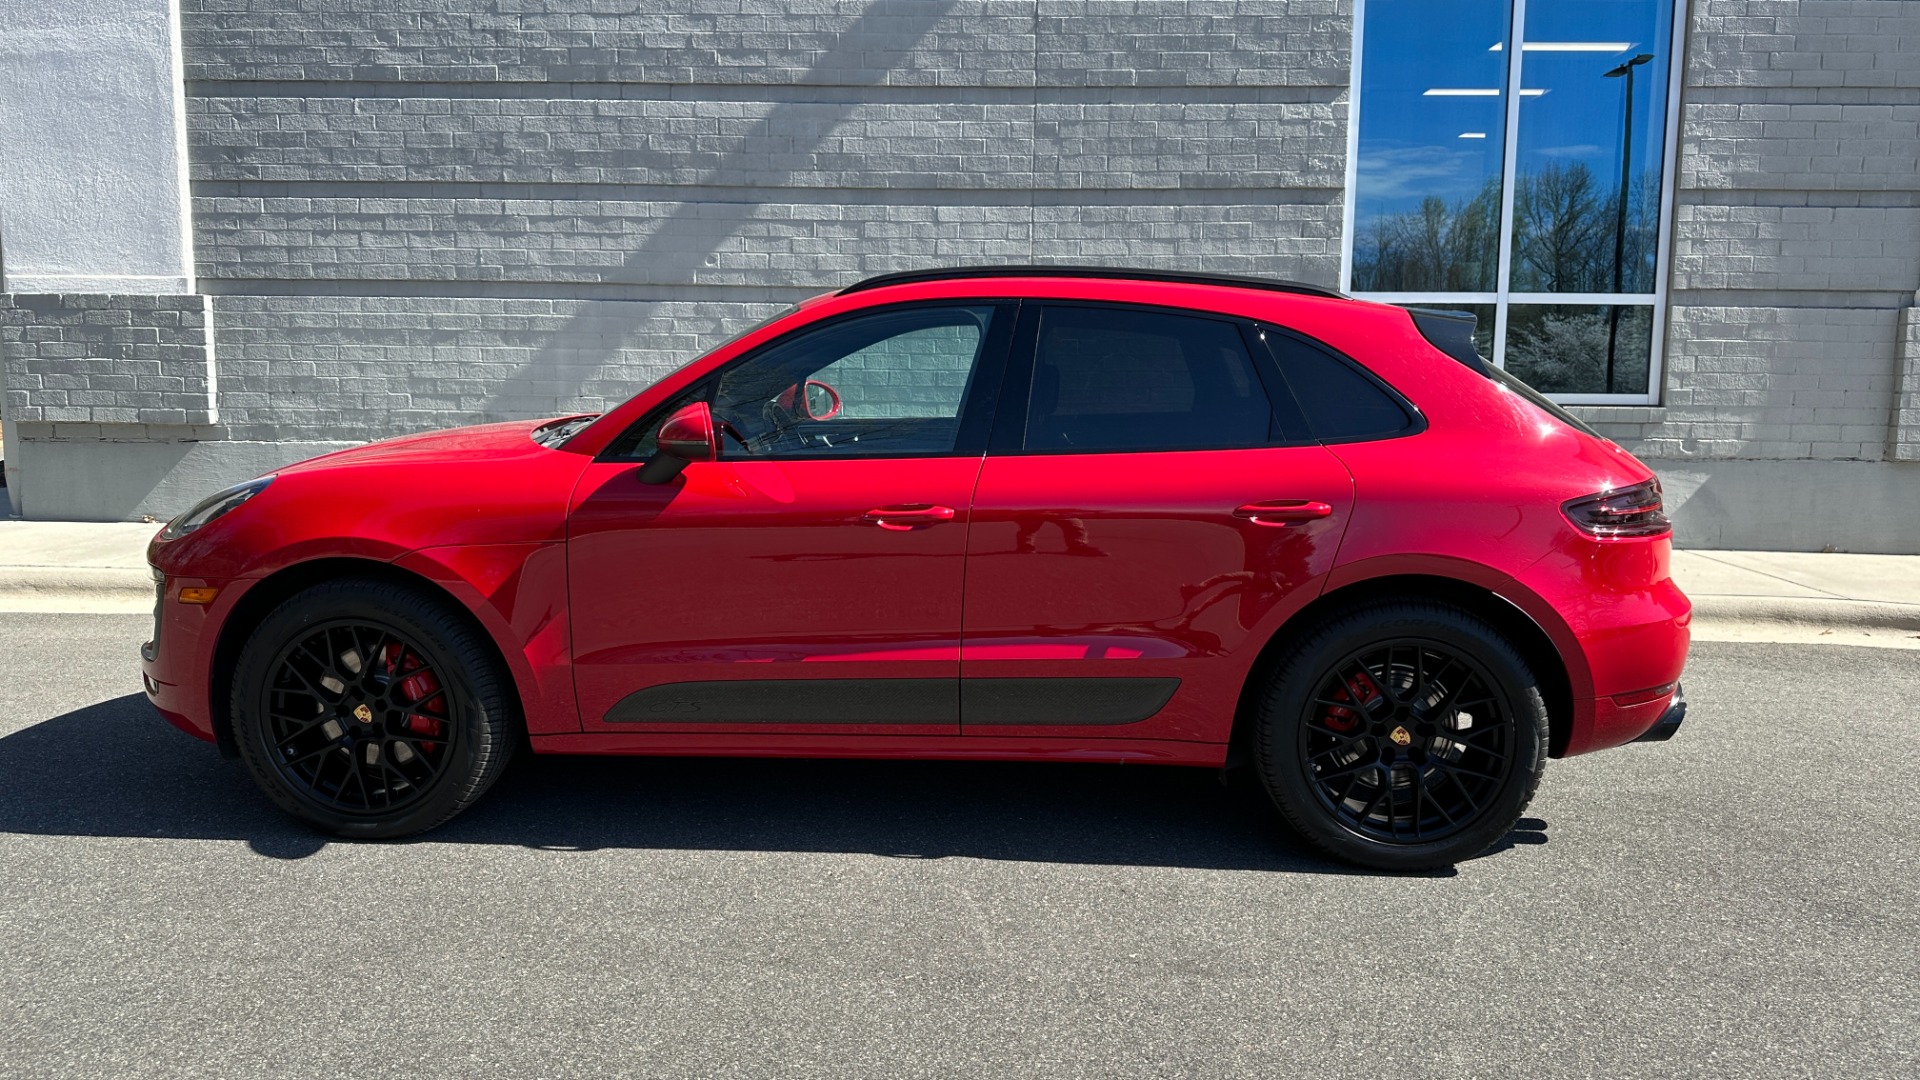 Used 2017 Porsche Macan GTS / CARBON FIBER / GTS INTERIOR / DYNAMIC LIGHTS / BOSE / SPORT WHEEL for sale Sold at Formula Imports in Charlotte NC 28227 6